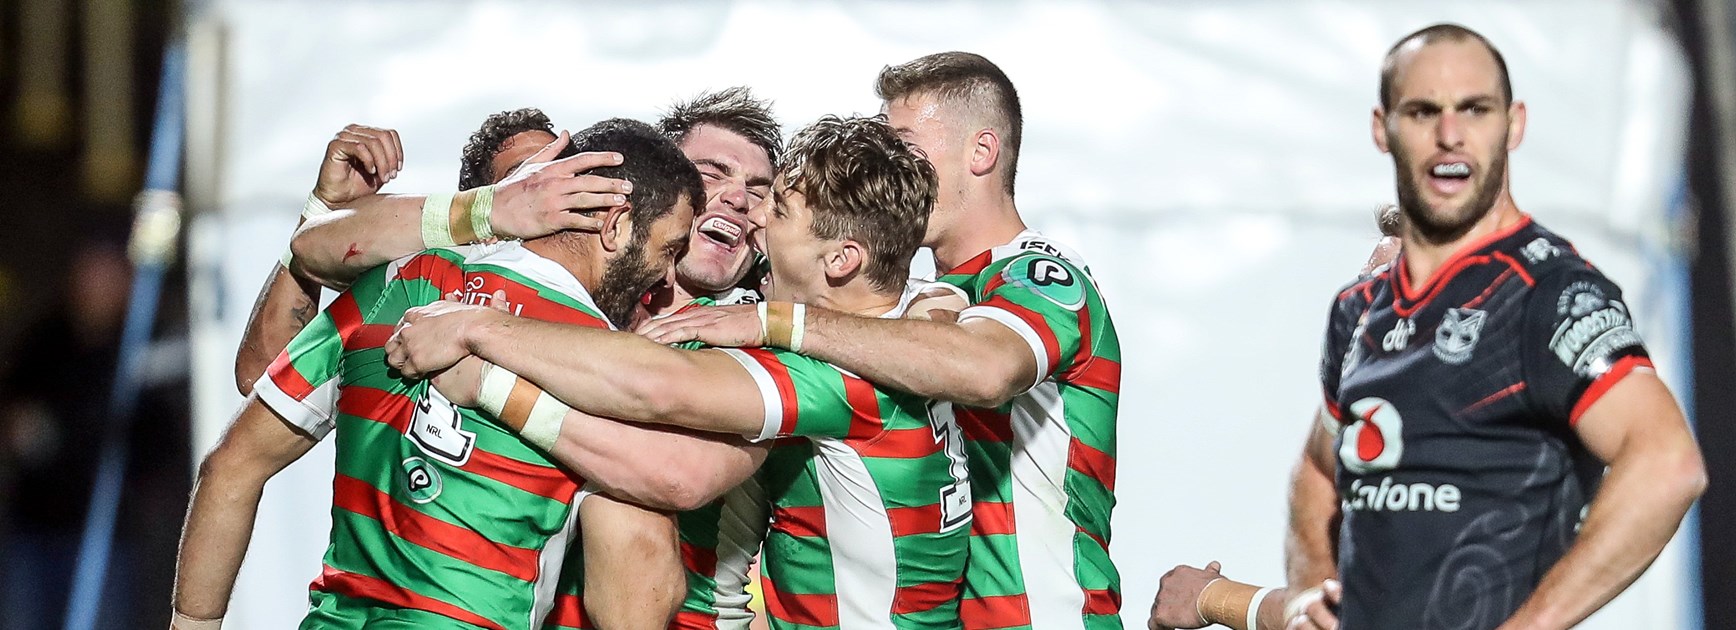 The Rabbitohs celebrate a try against the Warriors.